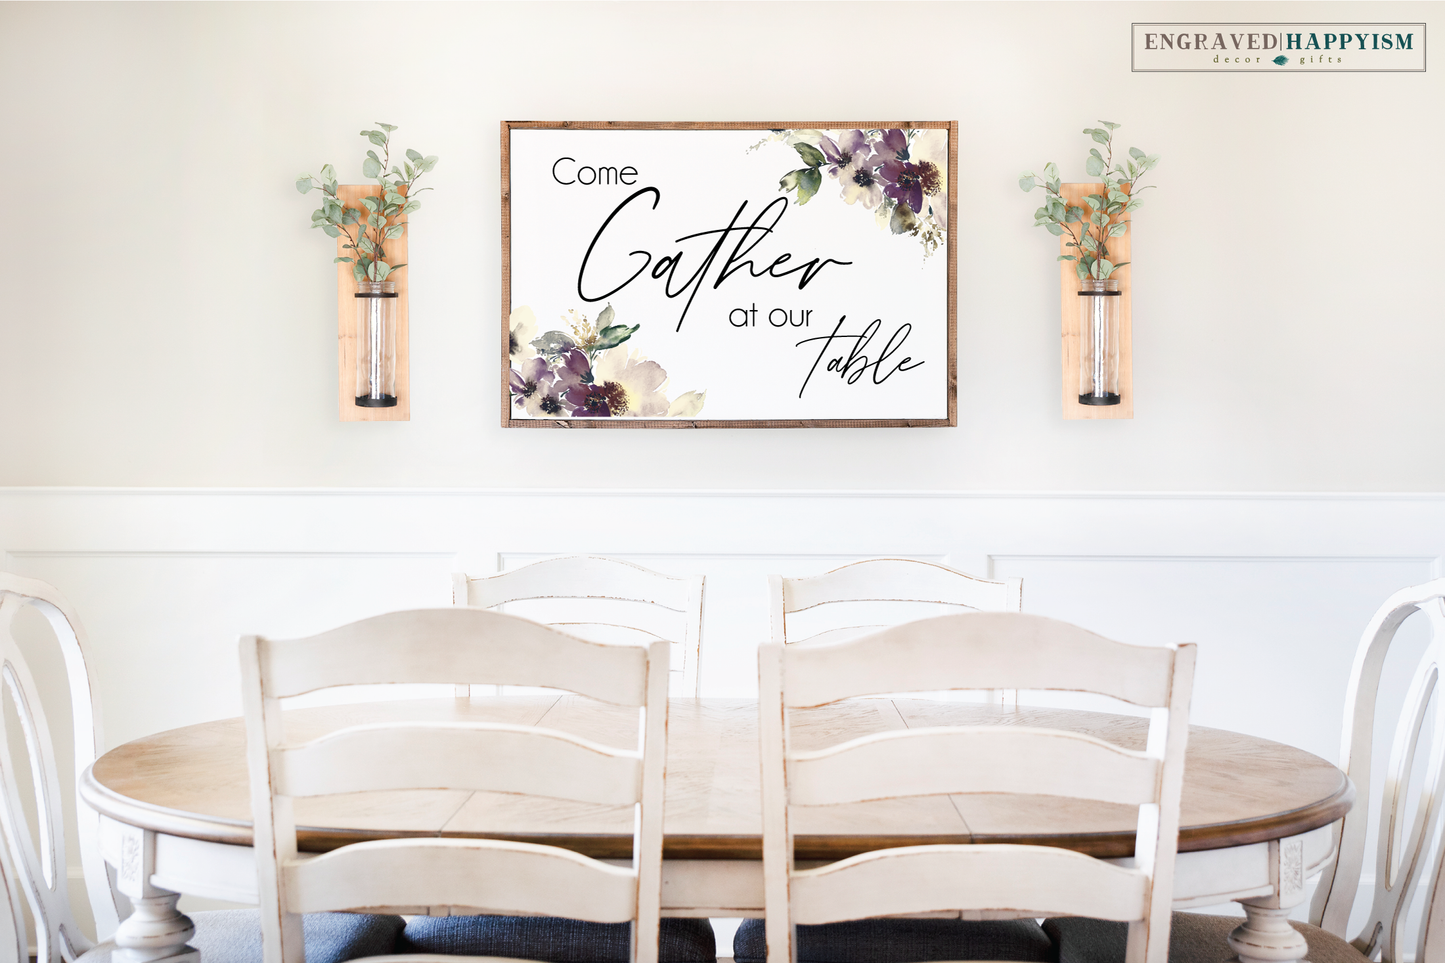 Dining room farmhouse sign - Come gather at our table